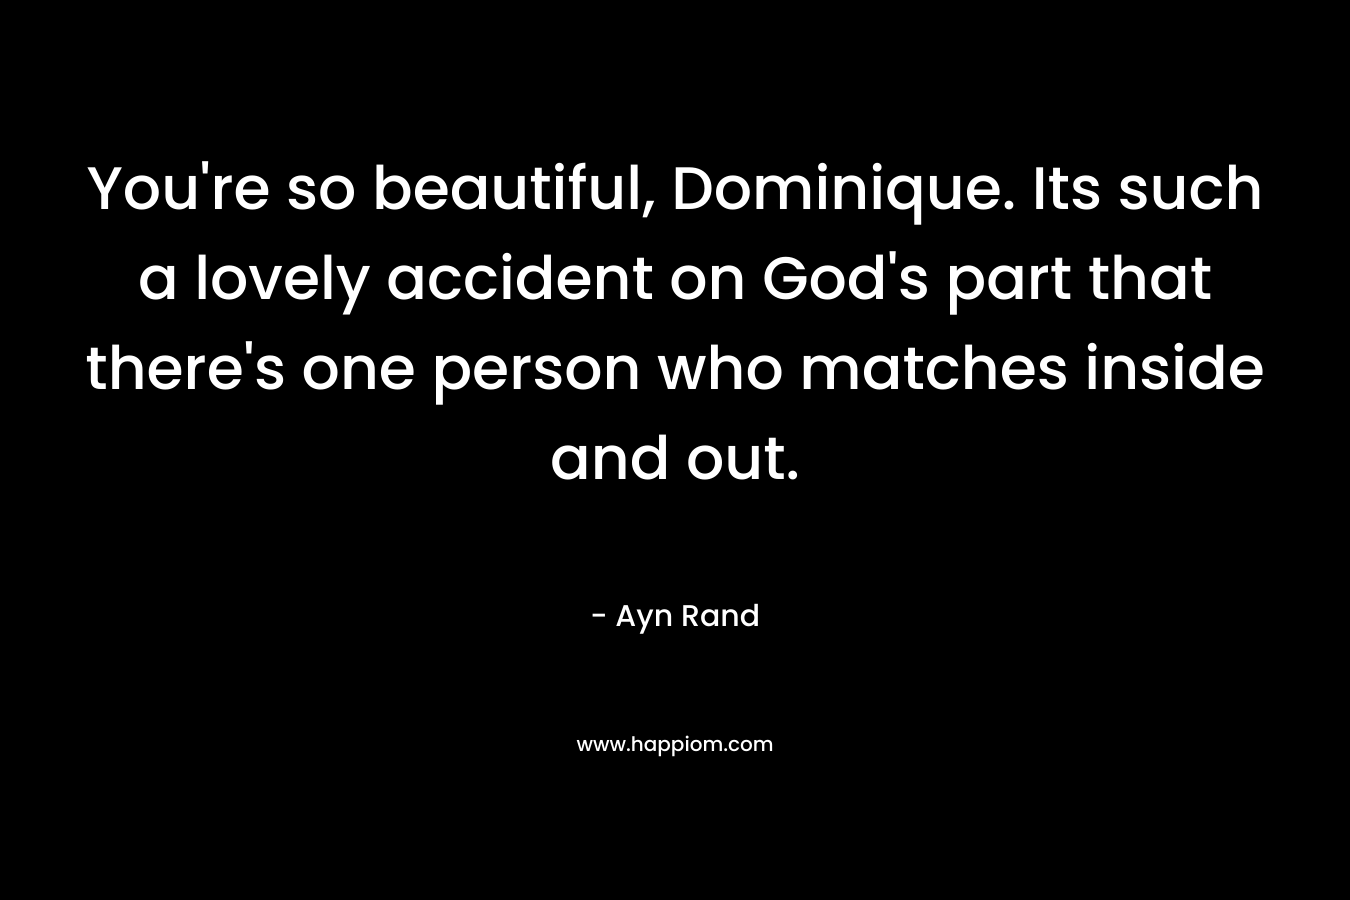 You’re so beautiful, Dominique. Its such a lovely accident on God’s part that there’s one person who matches inside and out. – Ayn Rand